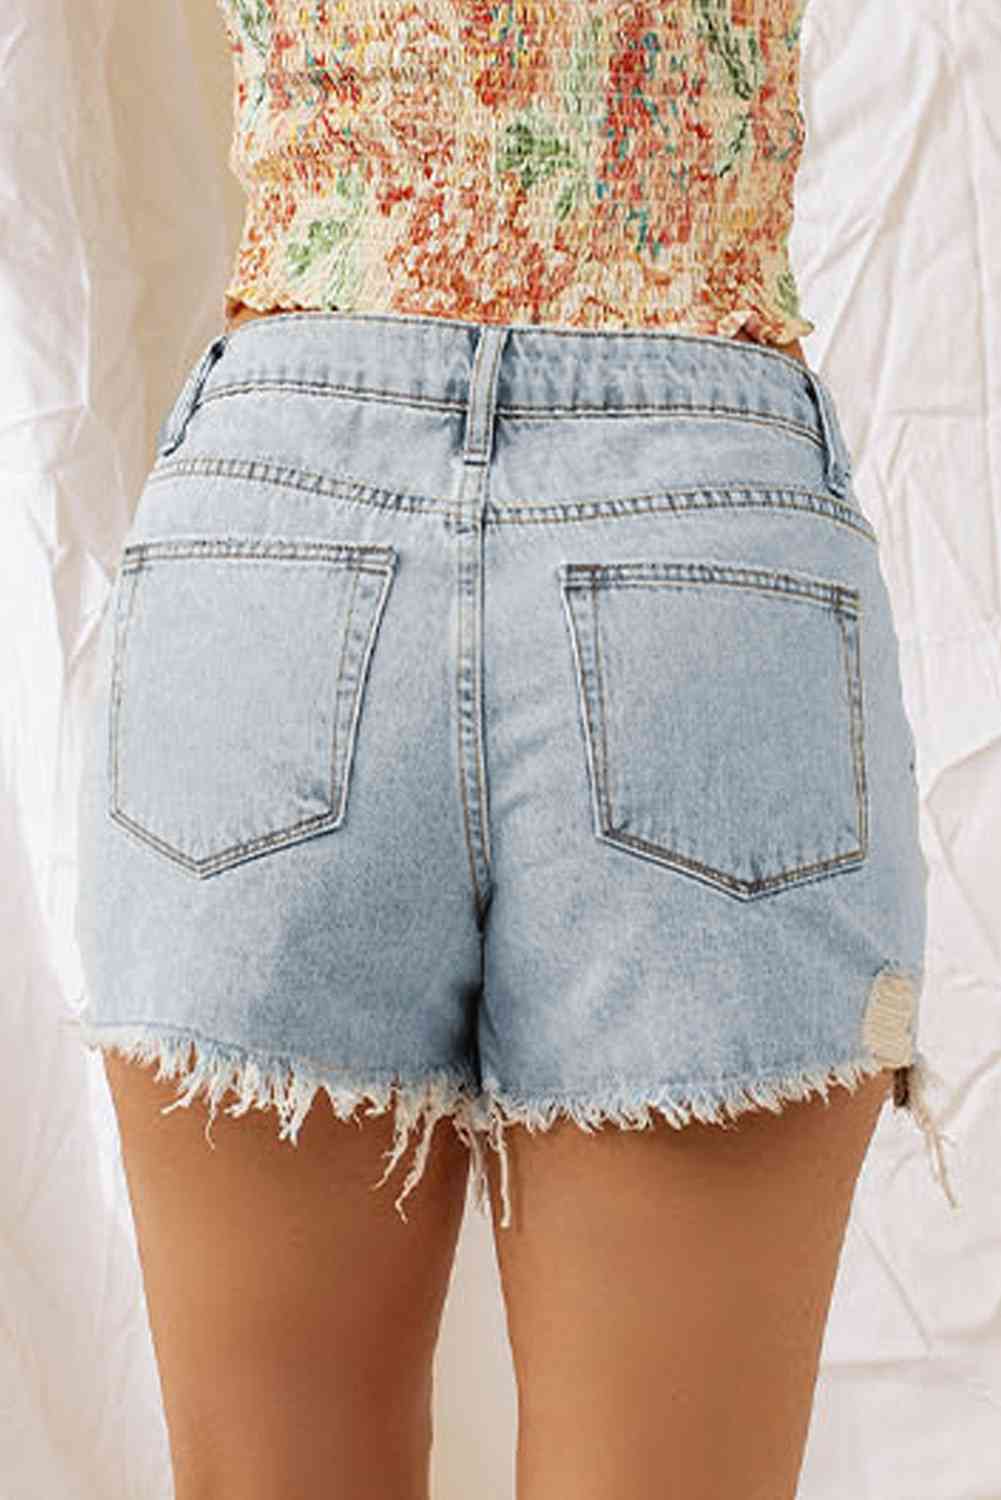 a woman in high waist denim shorts with a floral top